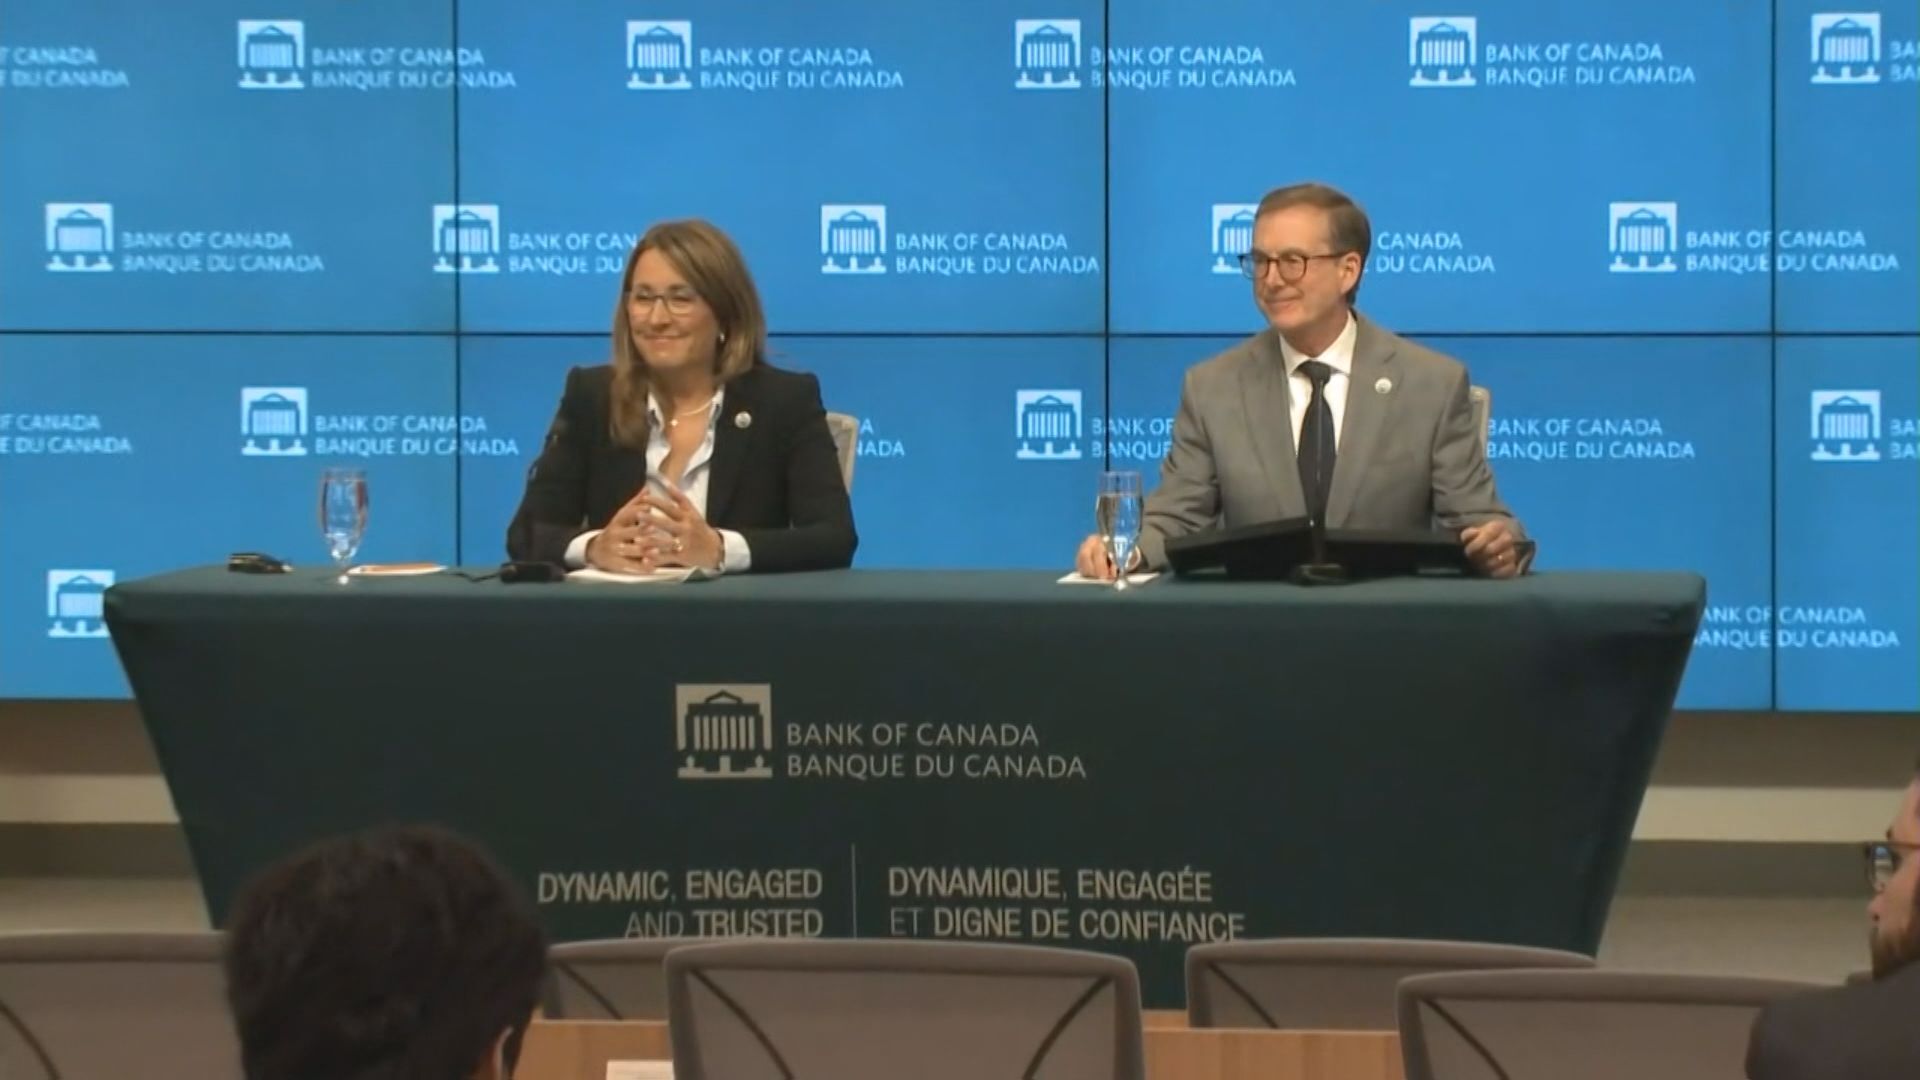 ‘It’s about time’: premier on first interest rate cut in 4 years